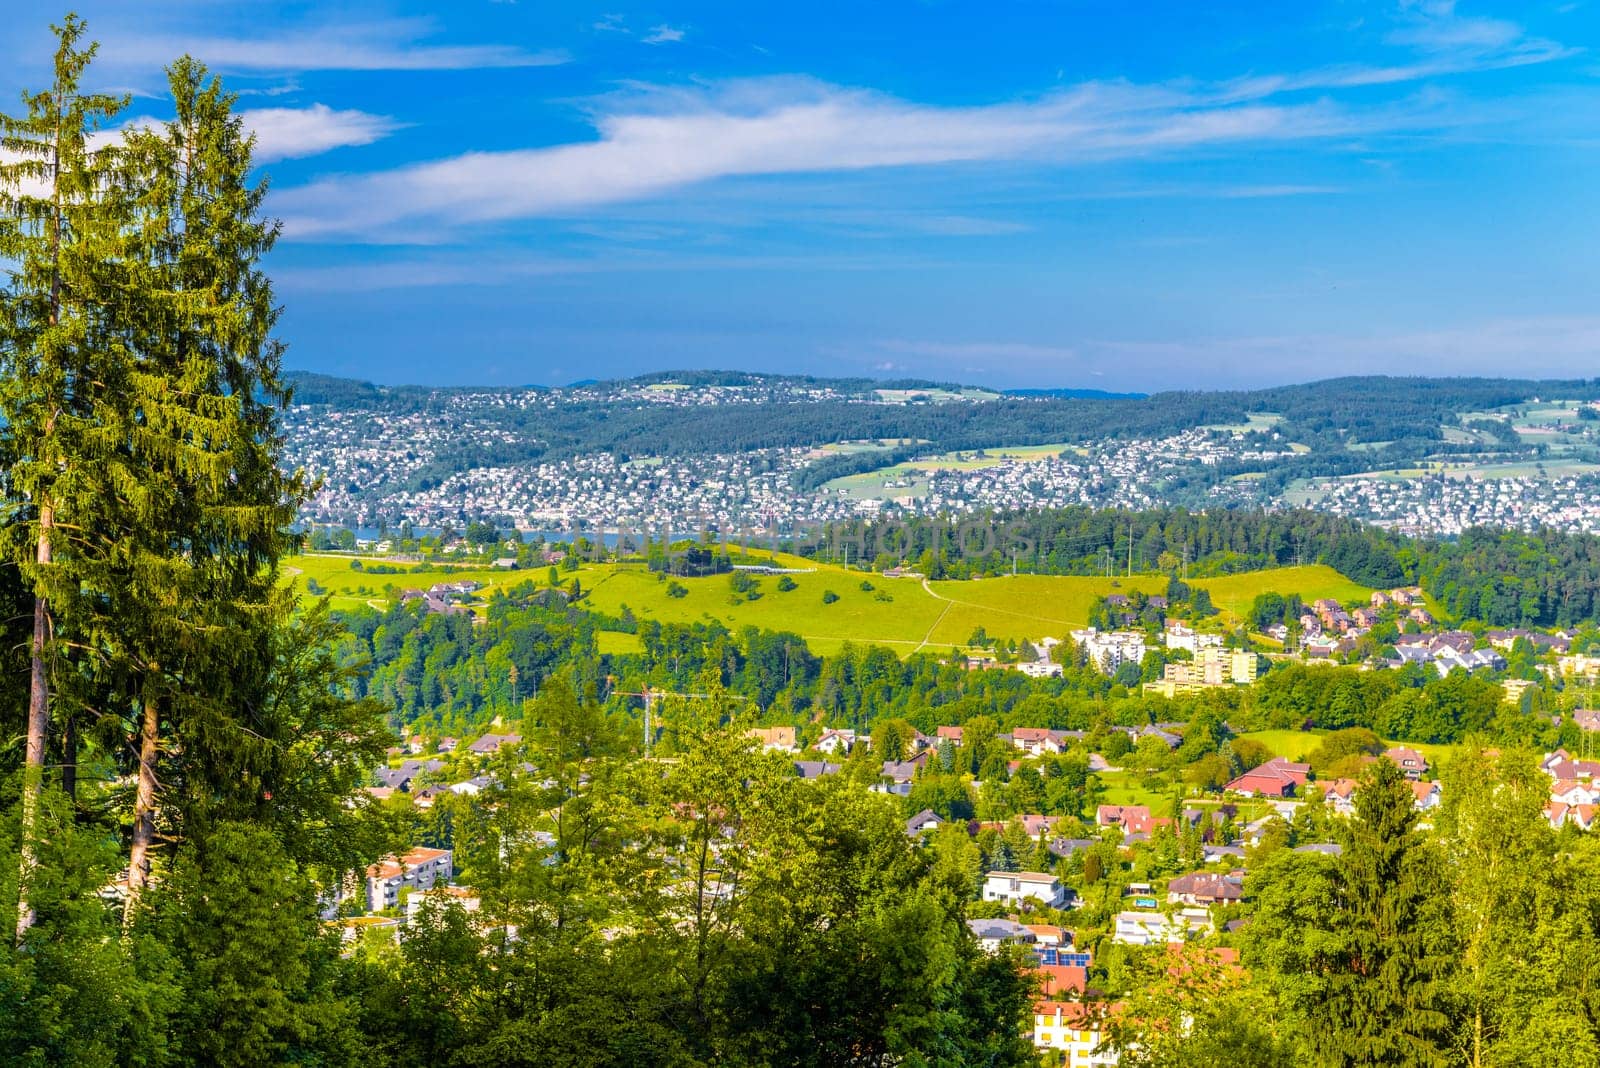 Houses and forests with meadows in Langnau am Albis, Horgen, Zurich, Switzerland.